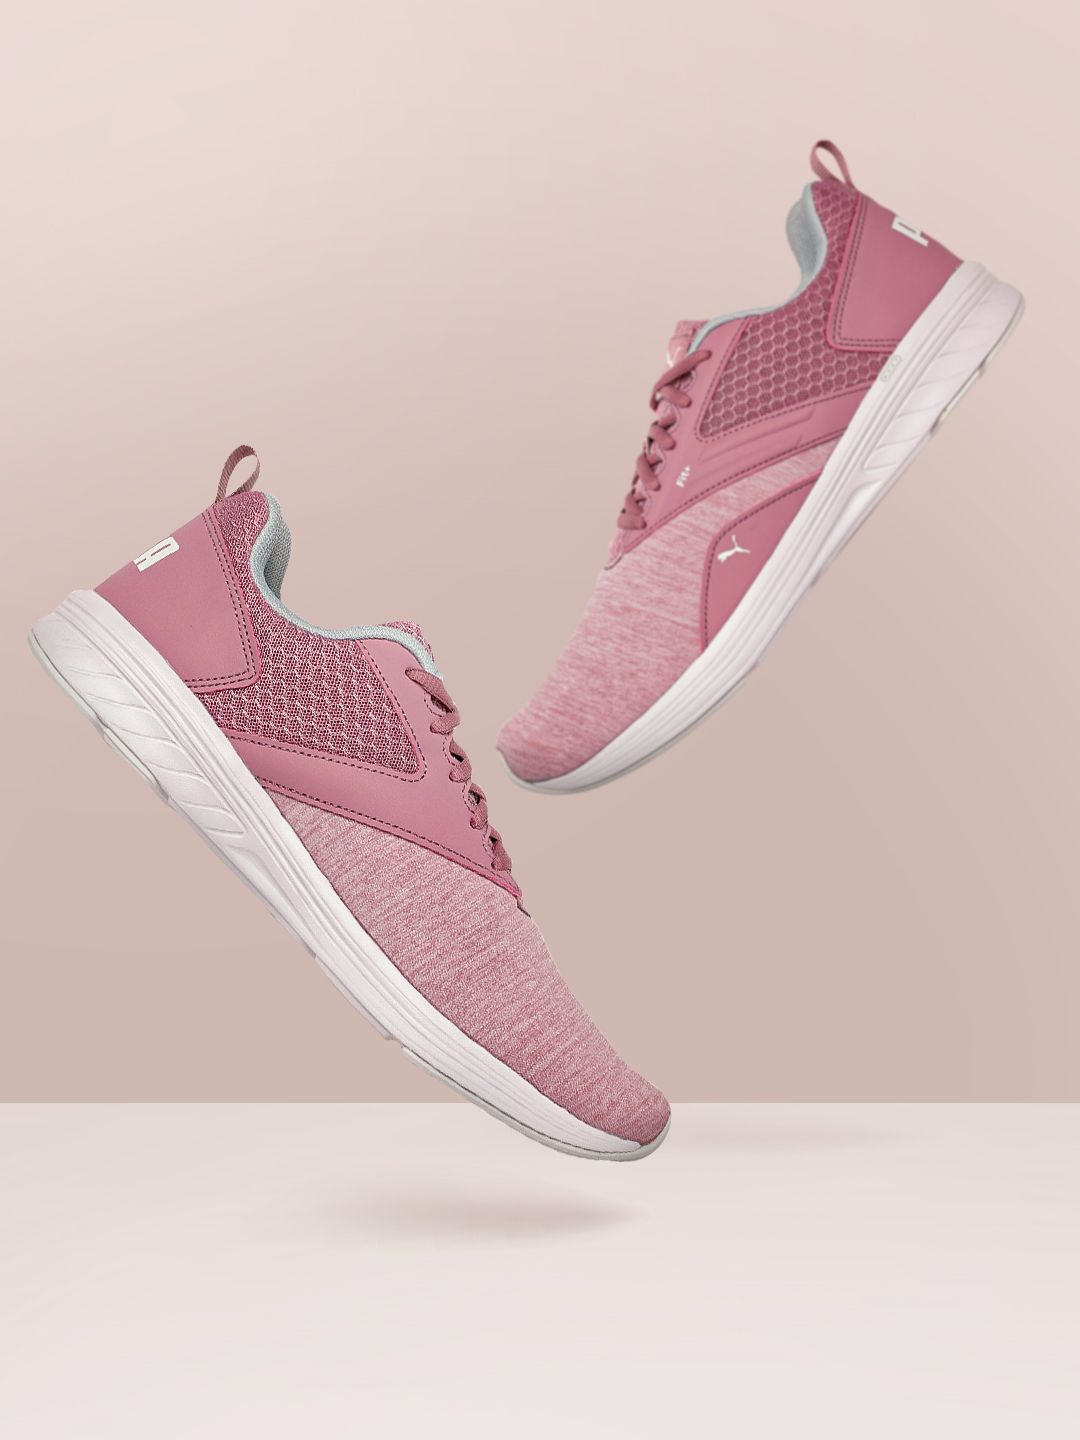 Puma Unisex Pink NRGY Comet Running Shoes Price in India